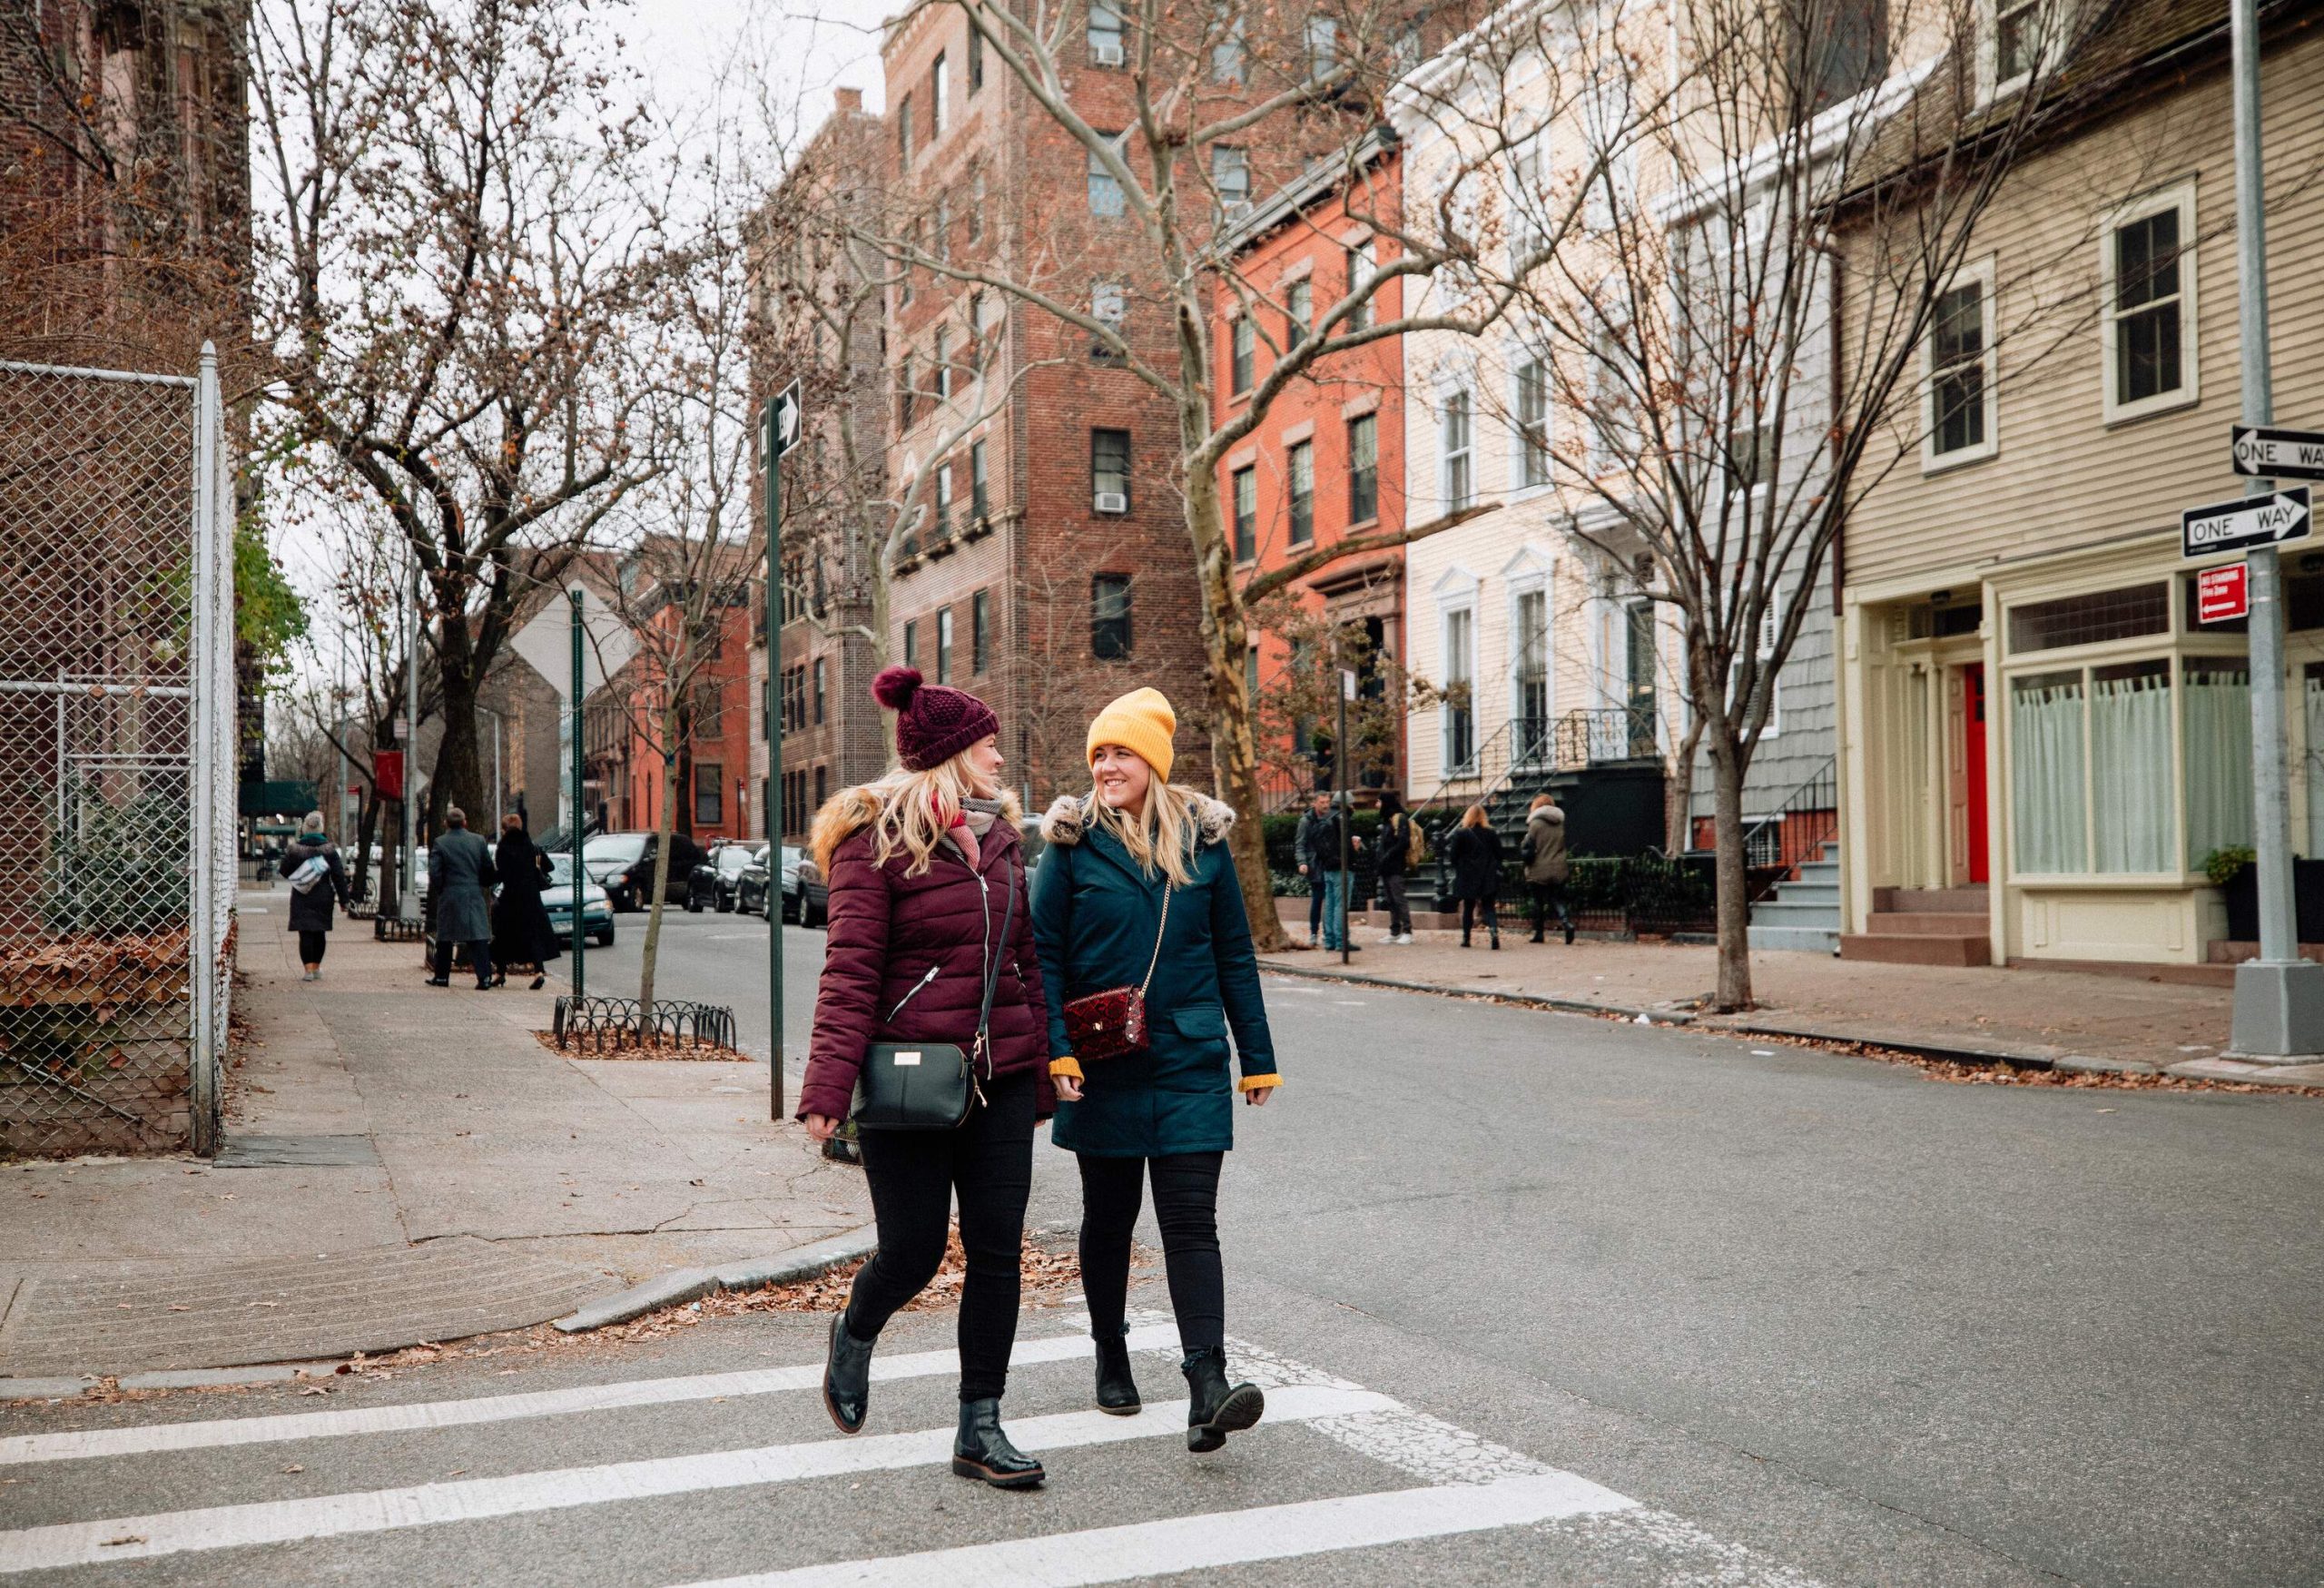 Two blonde women in winter clothes and knitted bonnets cross a pedestrian crossing in a neighbourhood with streets lined with bare trees.